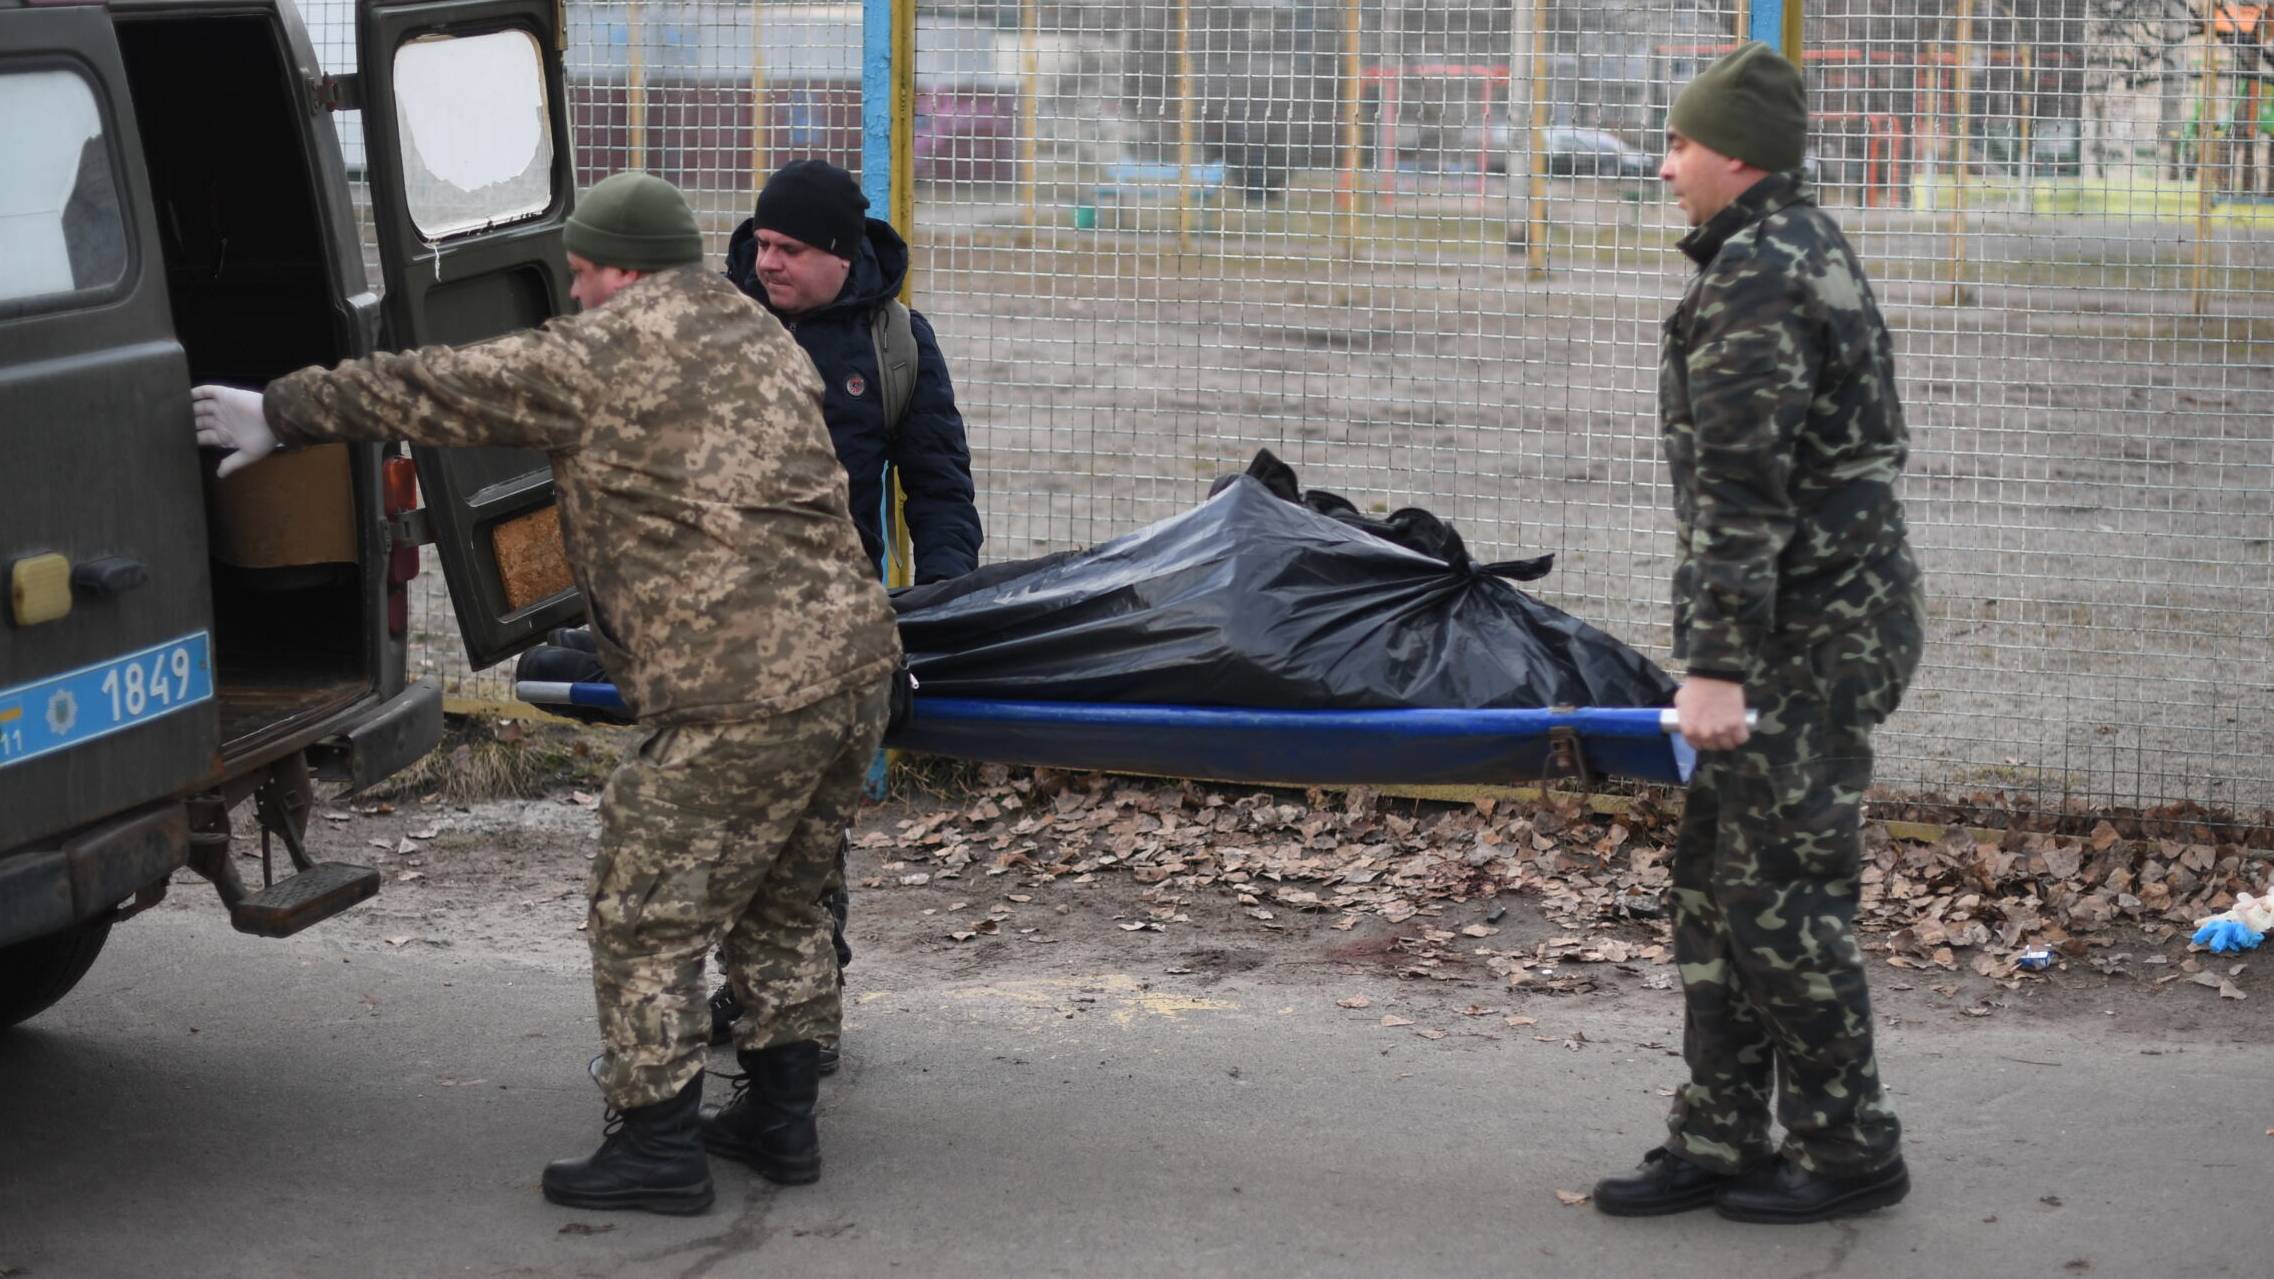 EDITORS NOTE: Graphic content / Ukrainian servicemen pick up the body of an Ukrainian man who was shot when a Russian armoured vehicle drove past him, on a sidewalk in the north of Kyiv on February 25, 2022. - Russian forces reached the outskirts of Kyiv on February 25, as Ukrainian President said the invading troops were targeting civilians and explosions could be heard in the besieged capital. (Photo by Daniel LEAL / AFP)